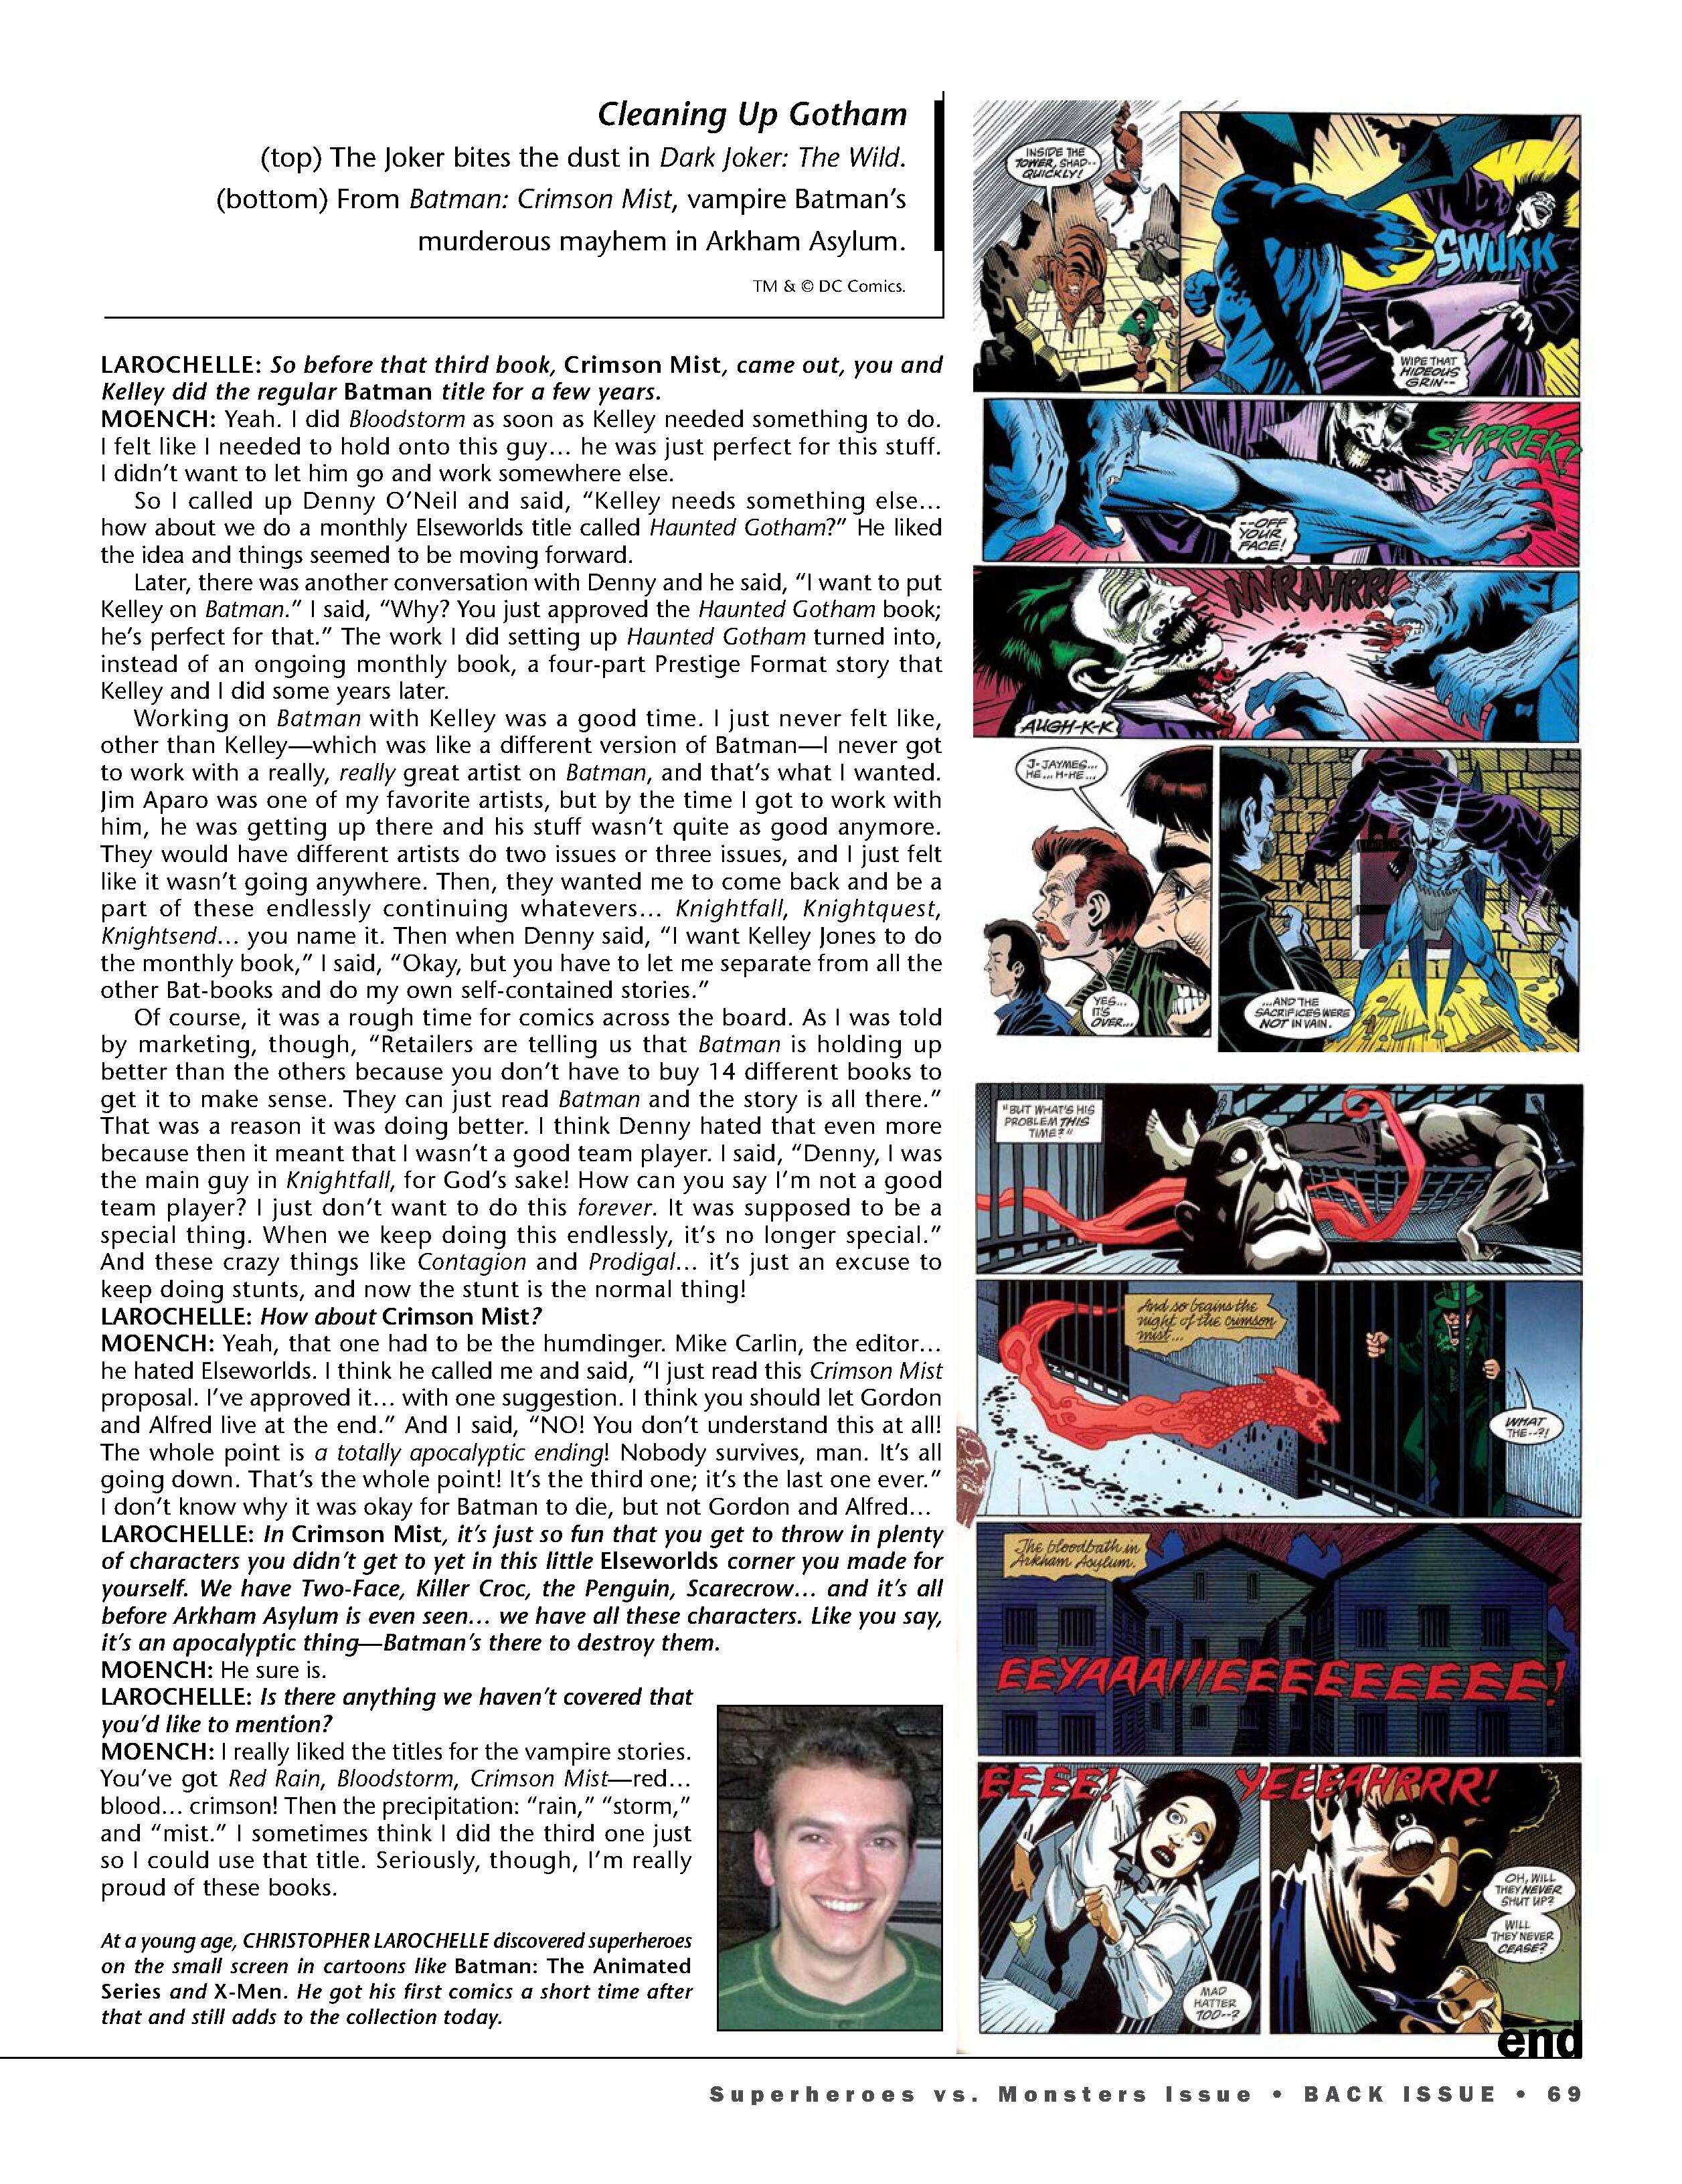 Read online Back Issue comic -  Issue #116 - 71